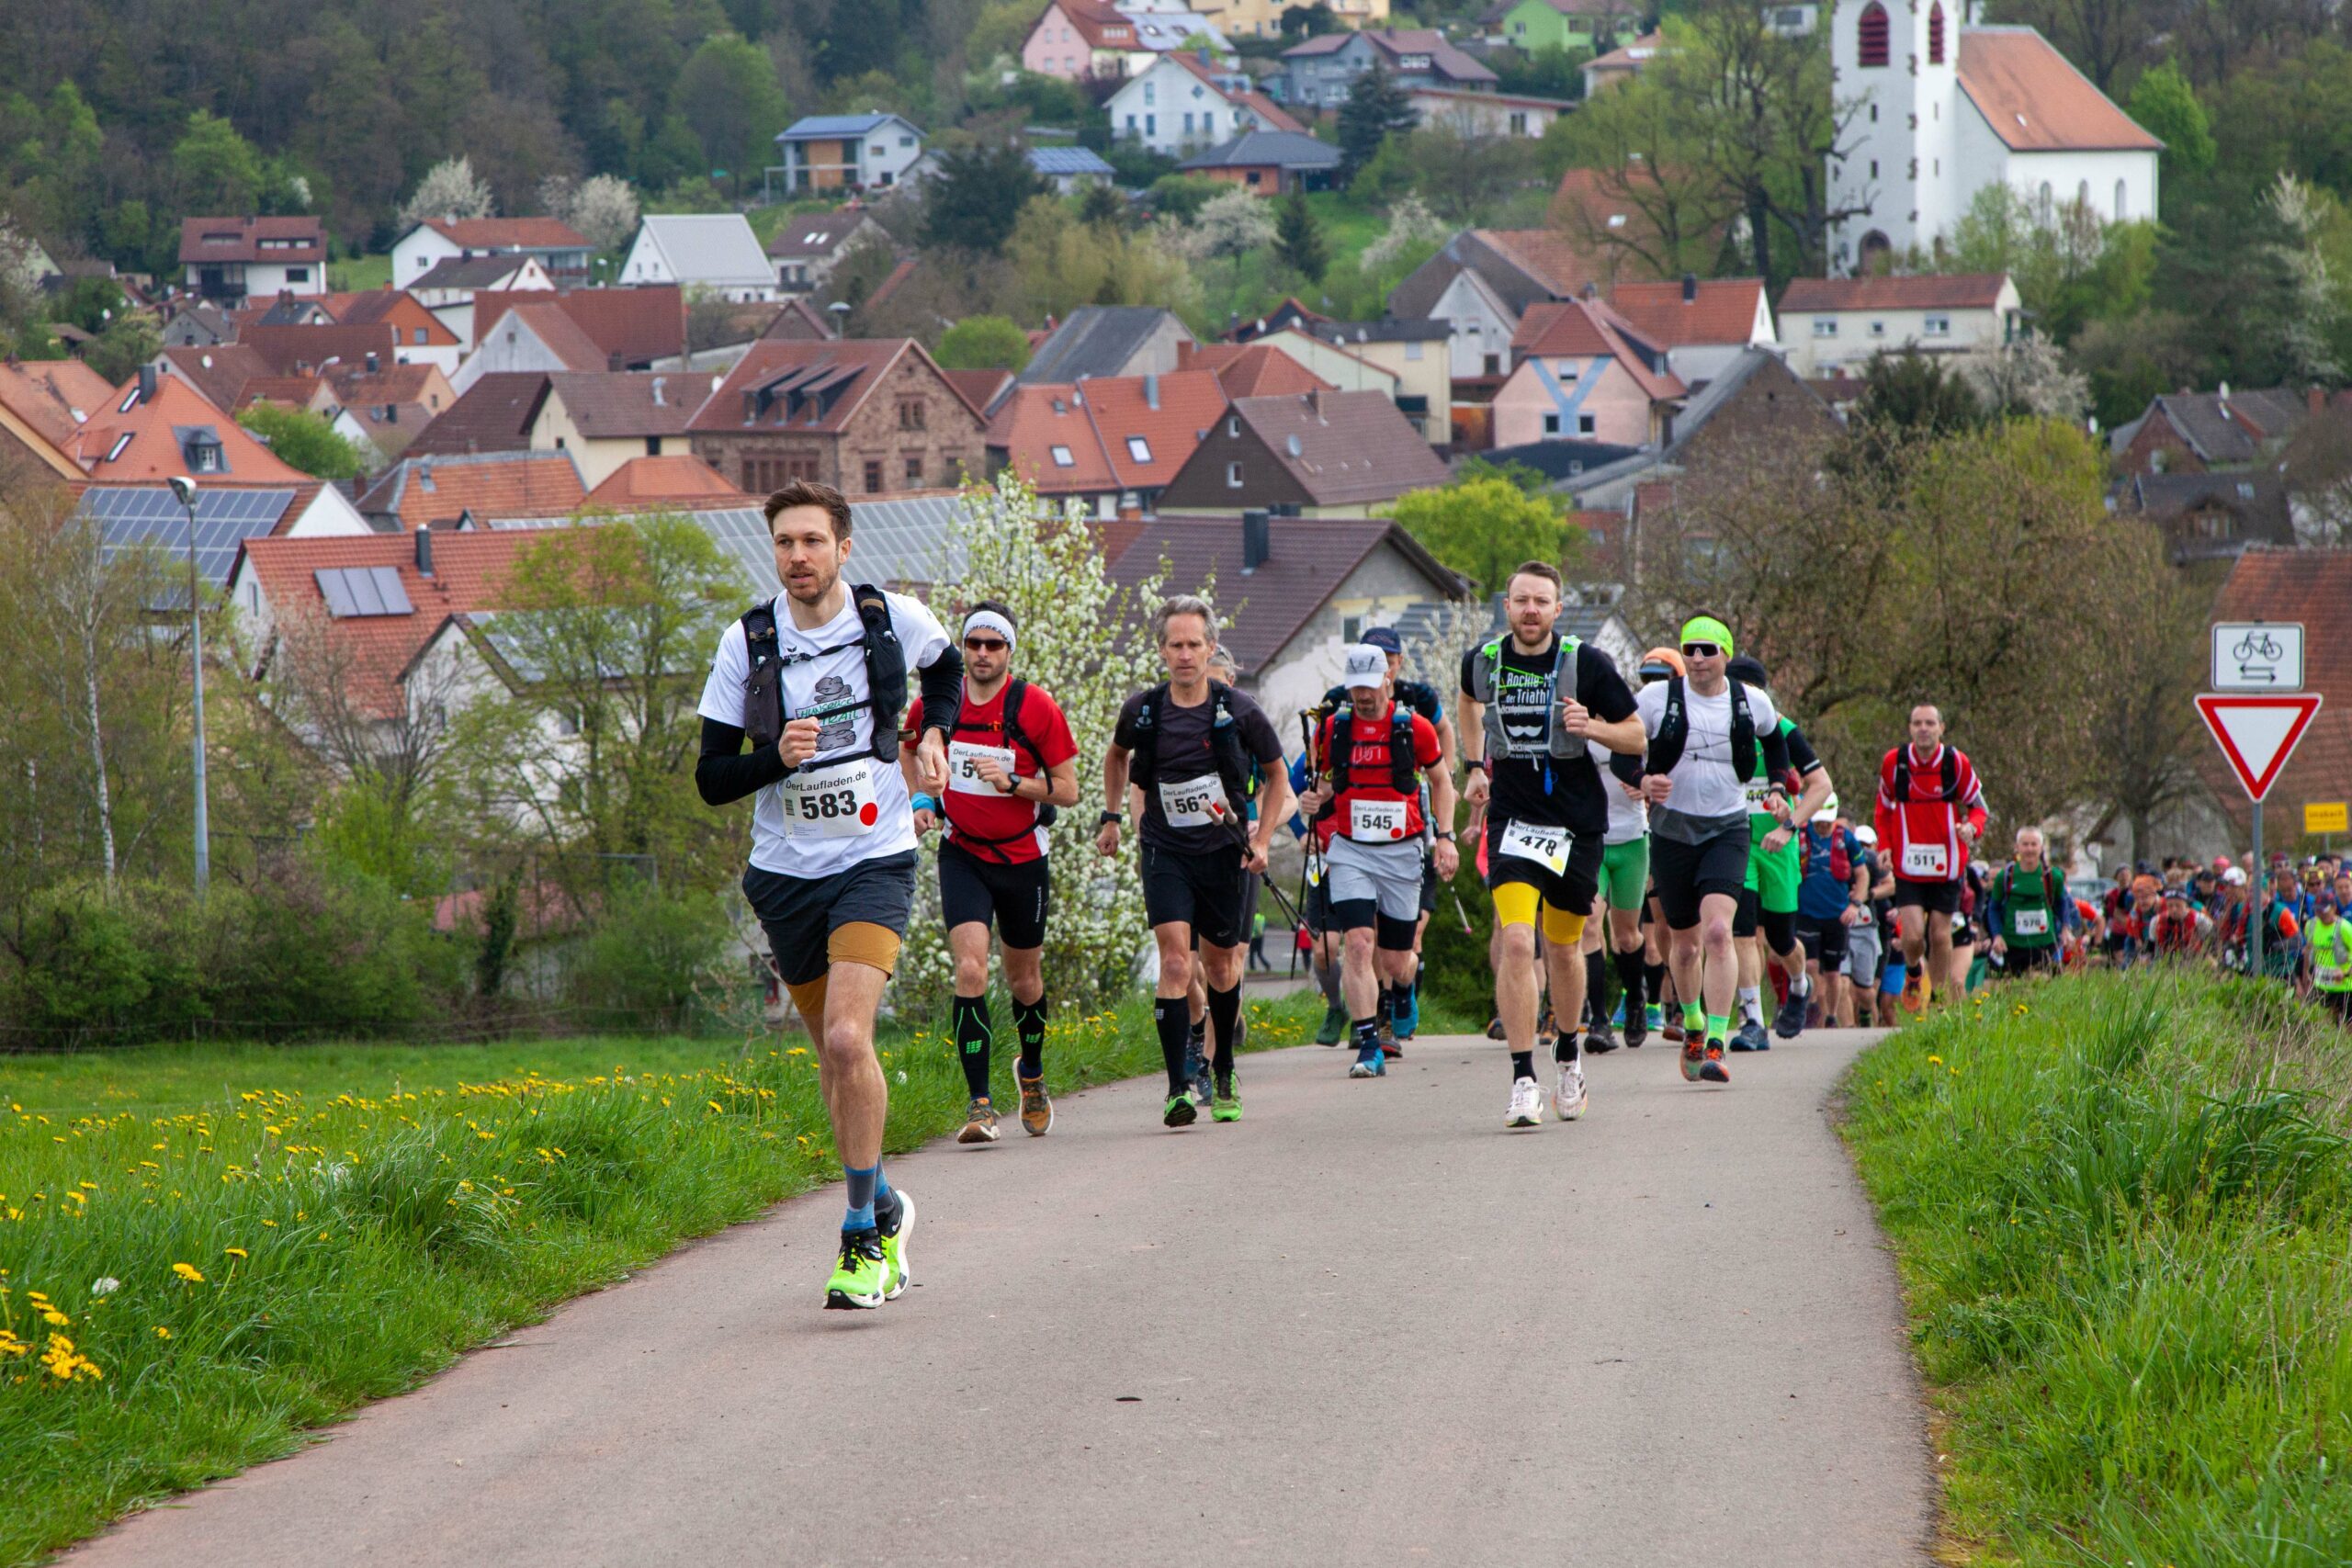 Runners at the Donnersberg Trail Event